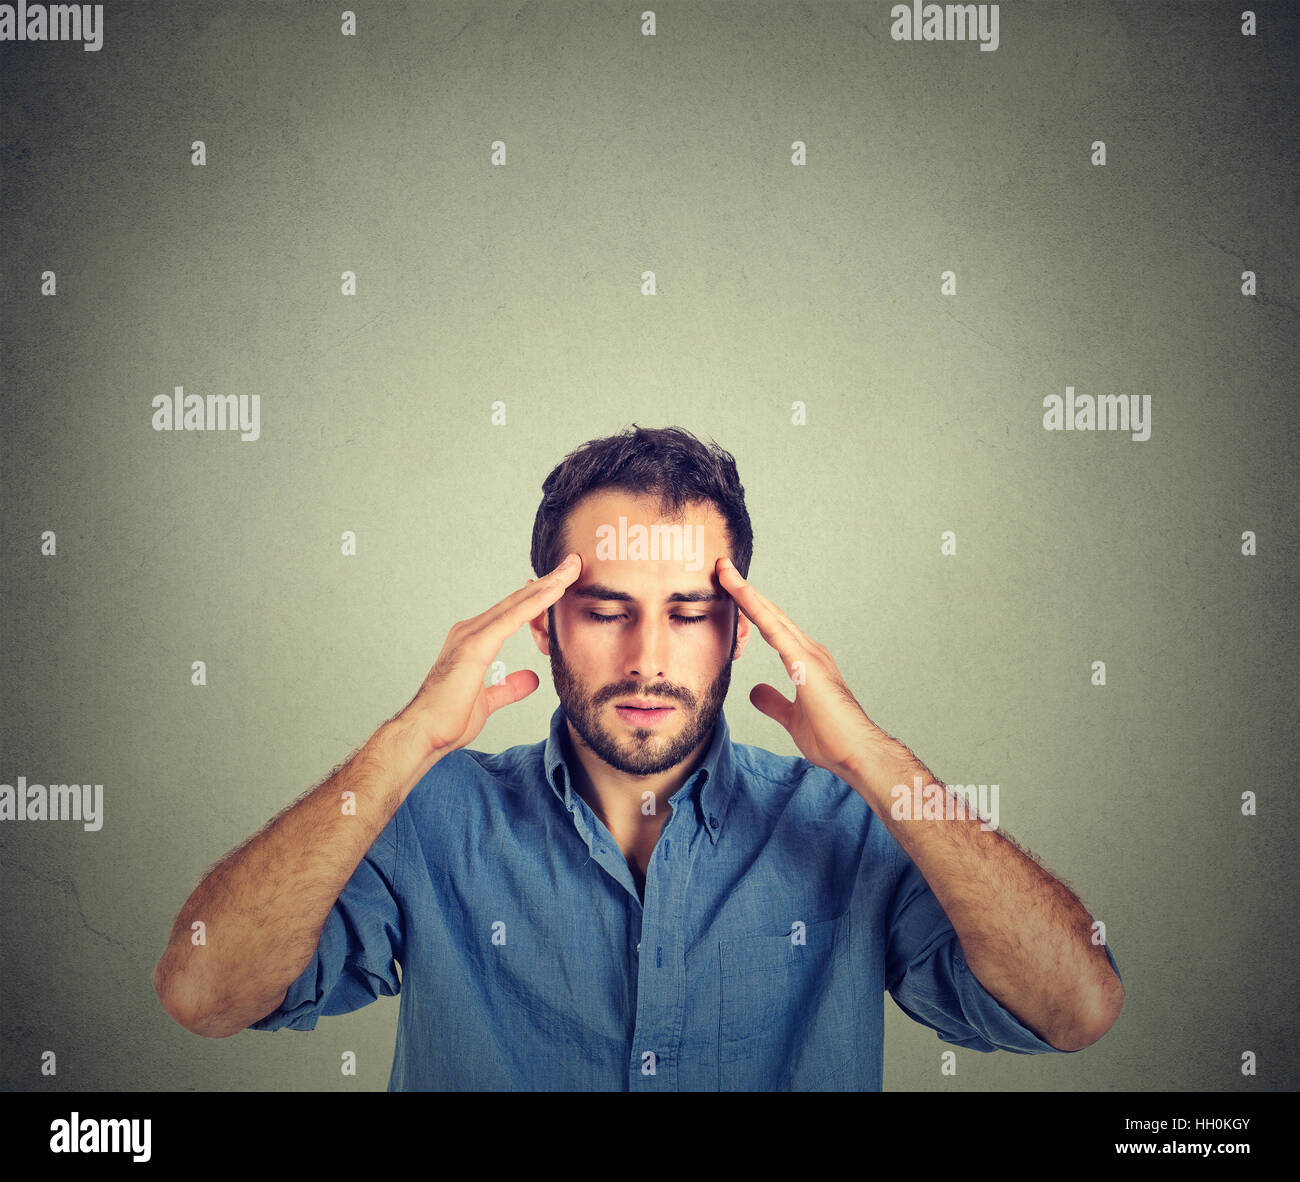 Stressed man thinking very intensely concentrating isolated on gray wall background Stock Photo